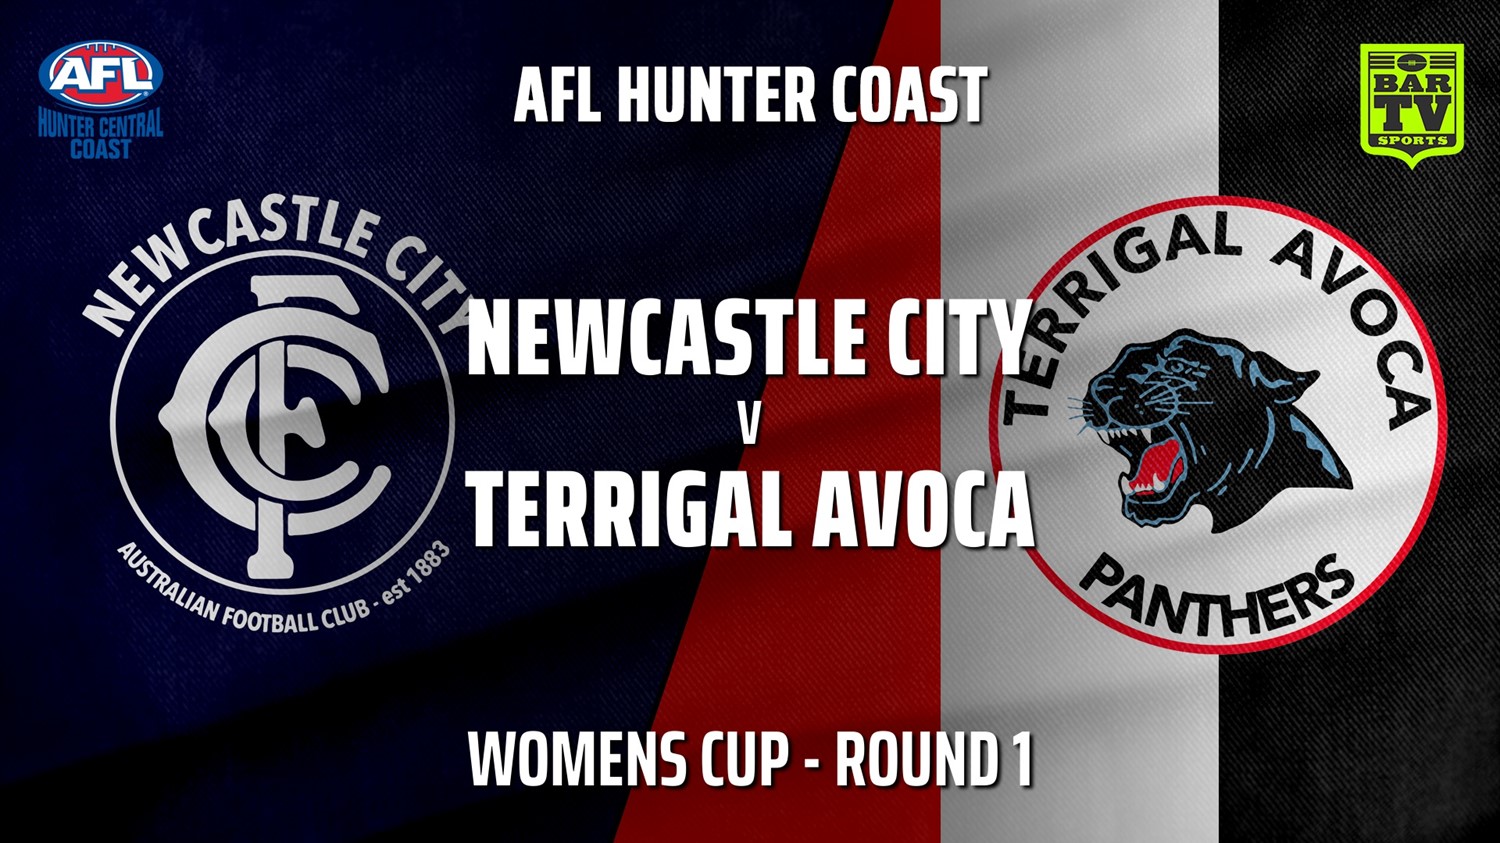 AFL HCC Round 1 - Womens Cup - Newcastle City  v Terrigal Avoca Panthers Minigame Slate Image